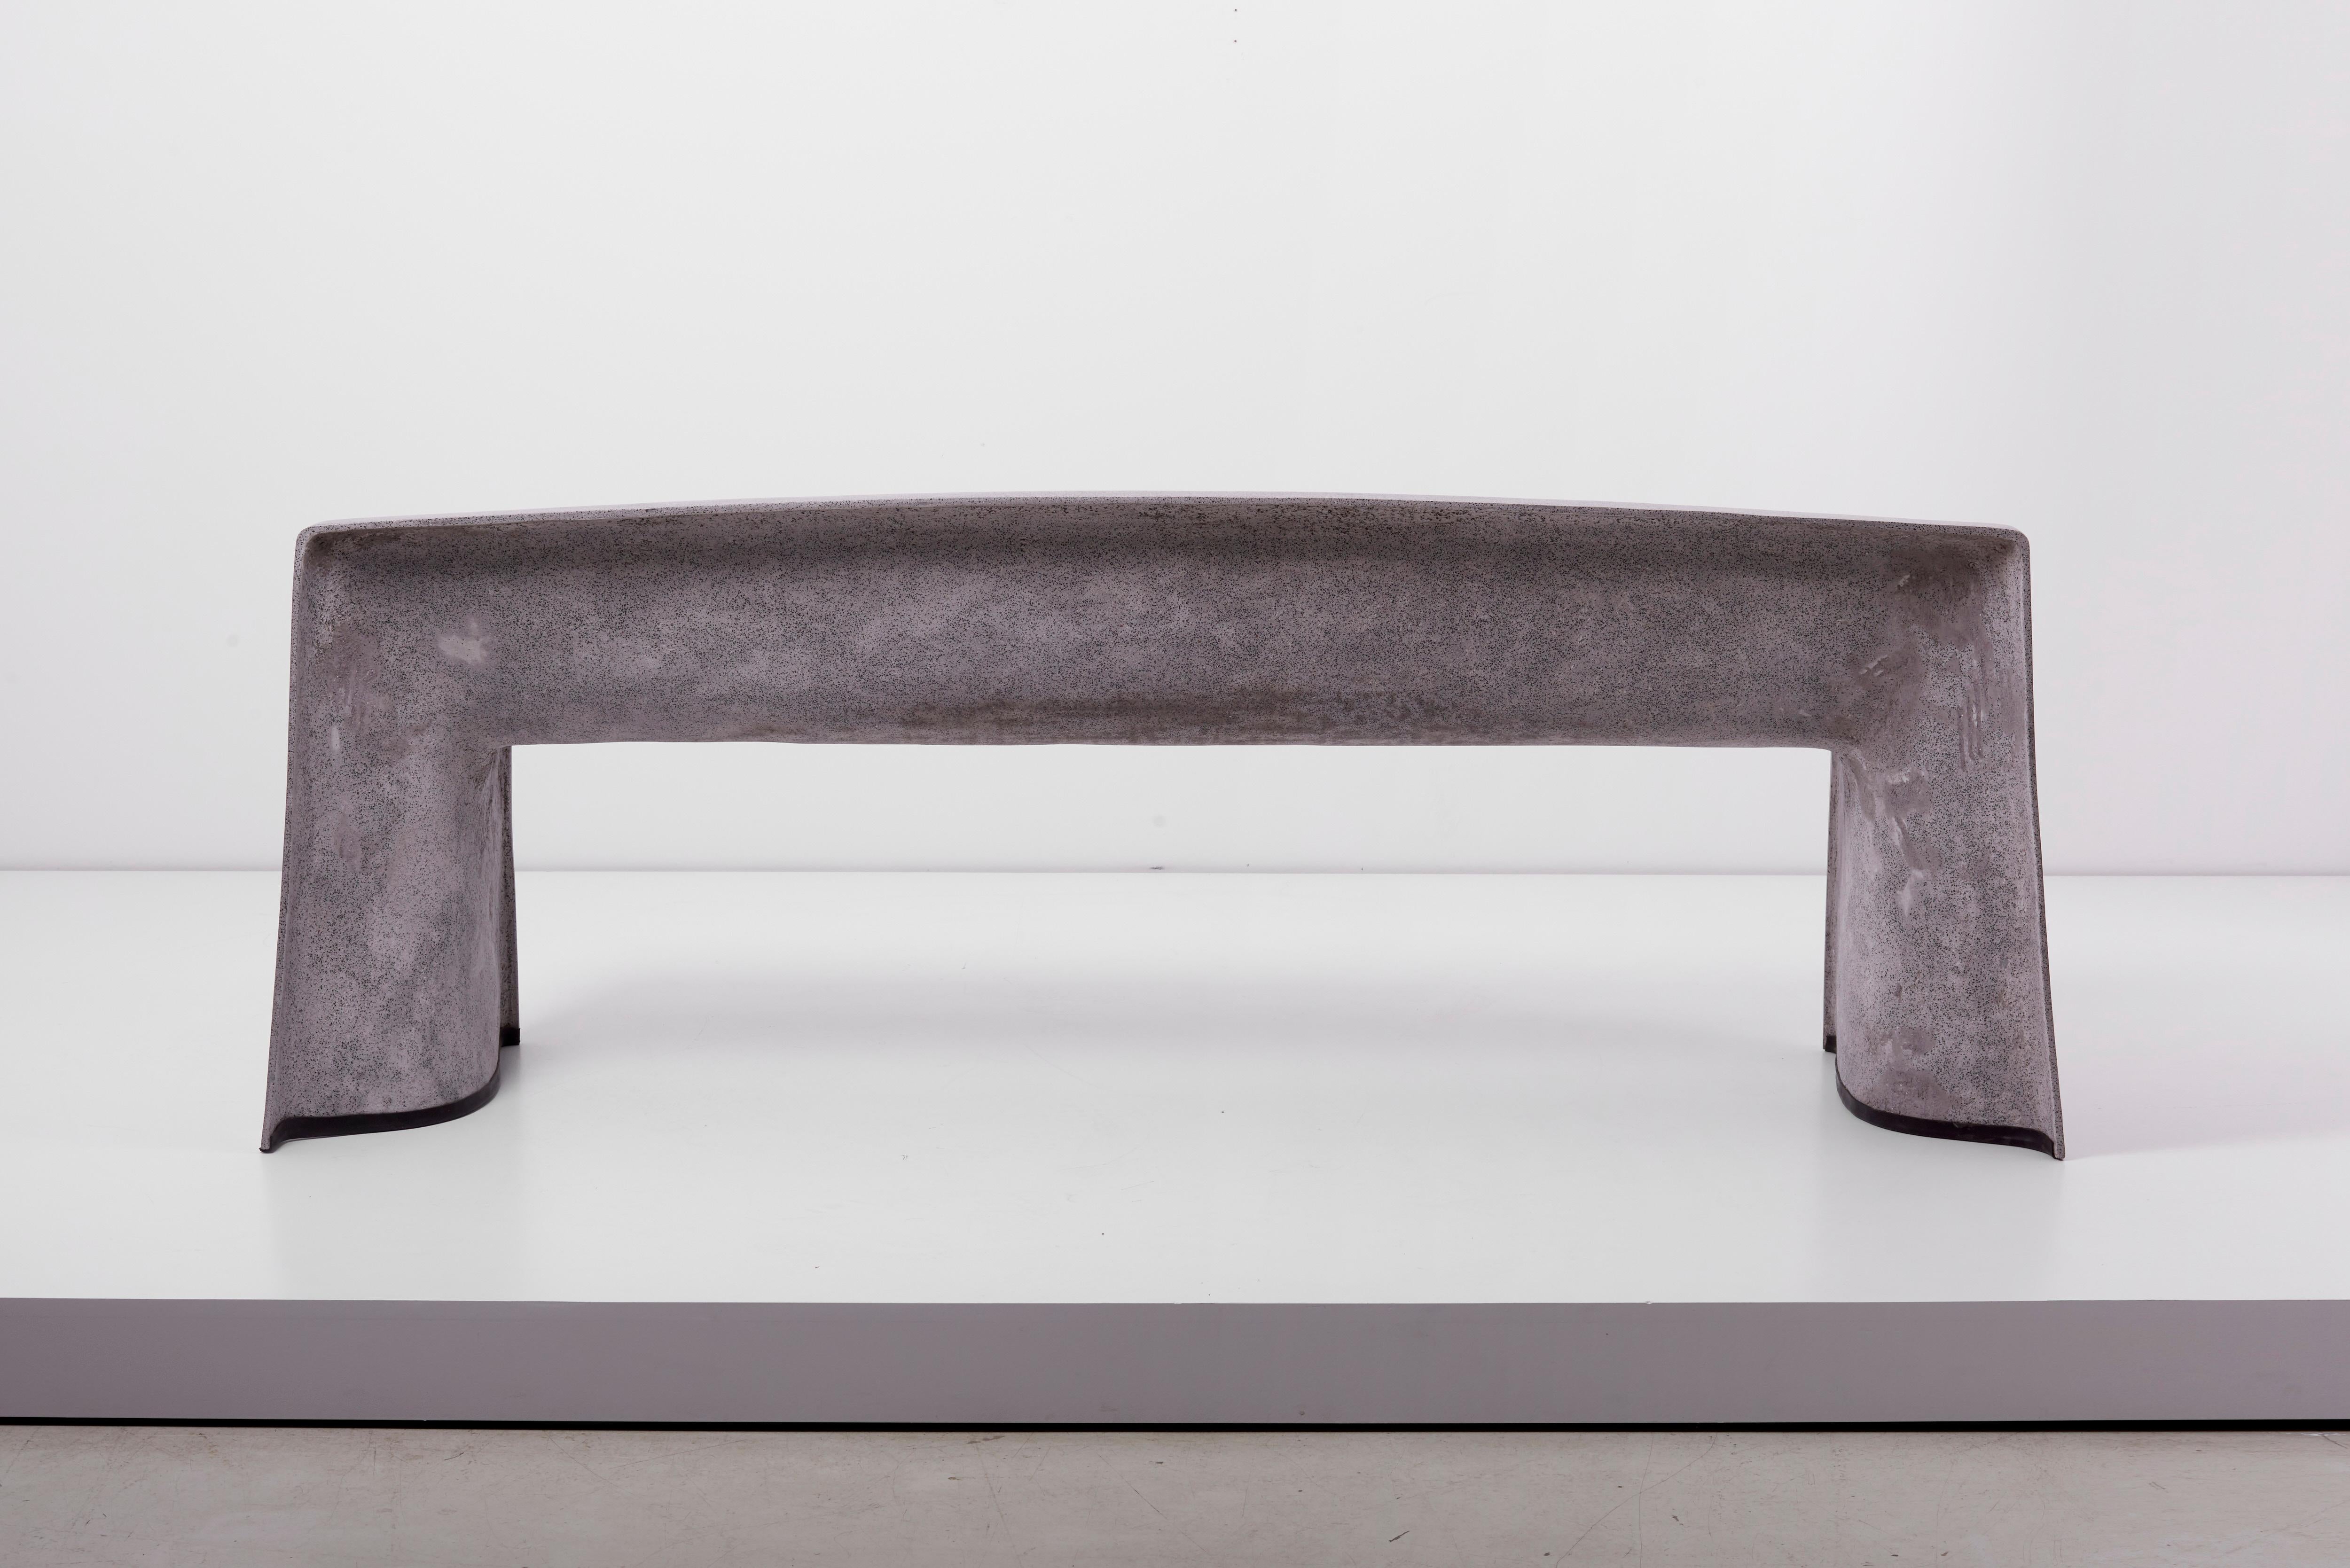 Architectural Concrete Bench by Martin Kleppe, Germany, circa 2011 For Sale 1